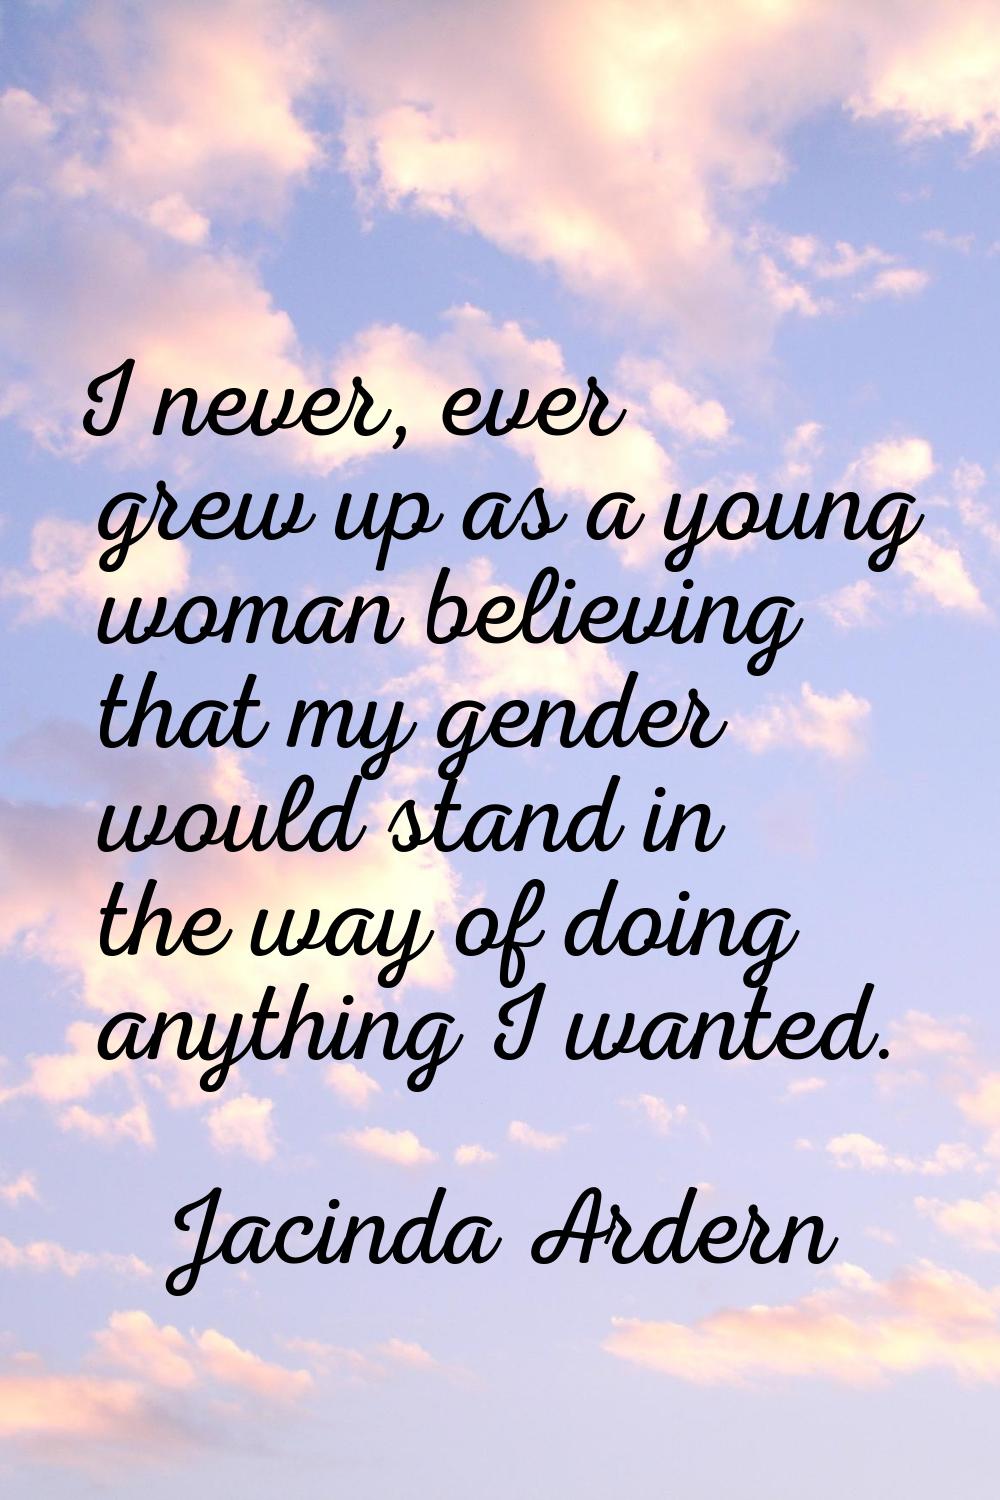 I never, ever grew up as a young woman believing that my gender would stand in the way of doing any